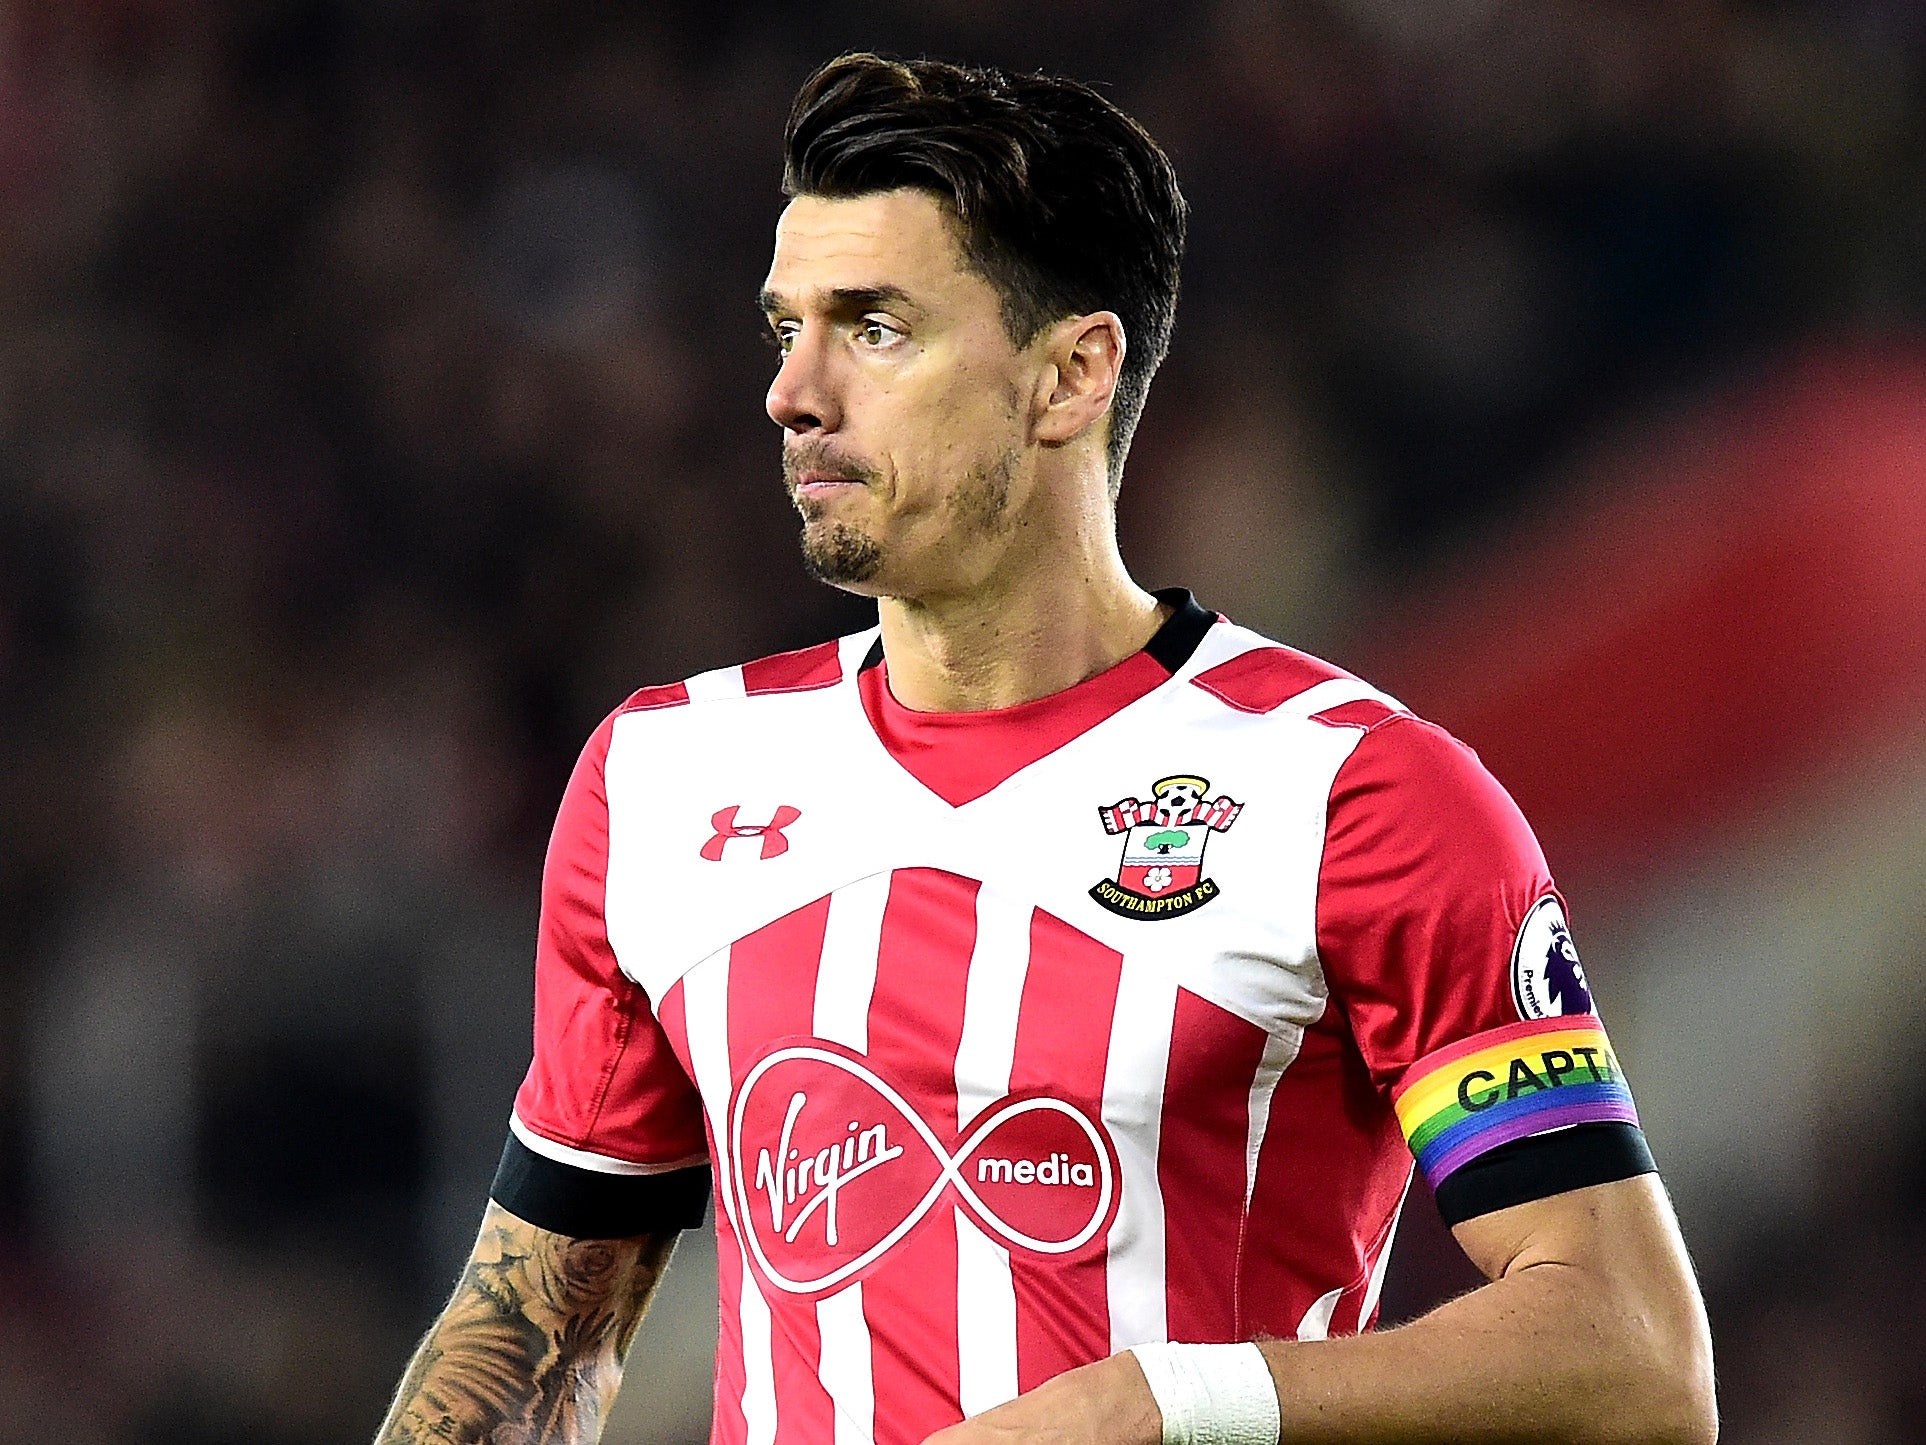 Jose Fonte confirmed he was offered a pay rise in the summer but not an extension